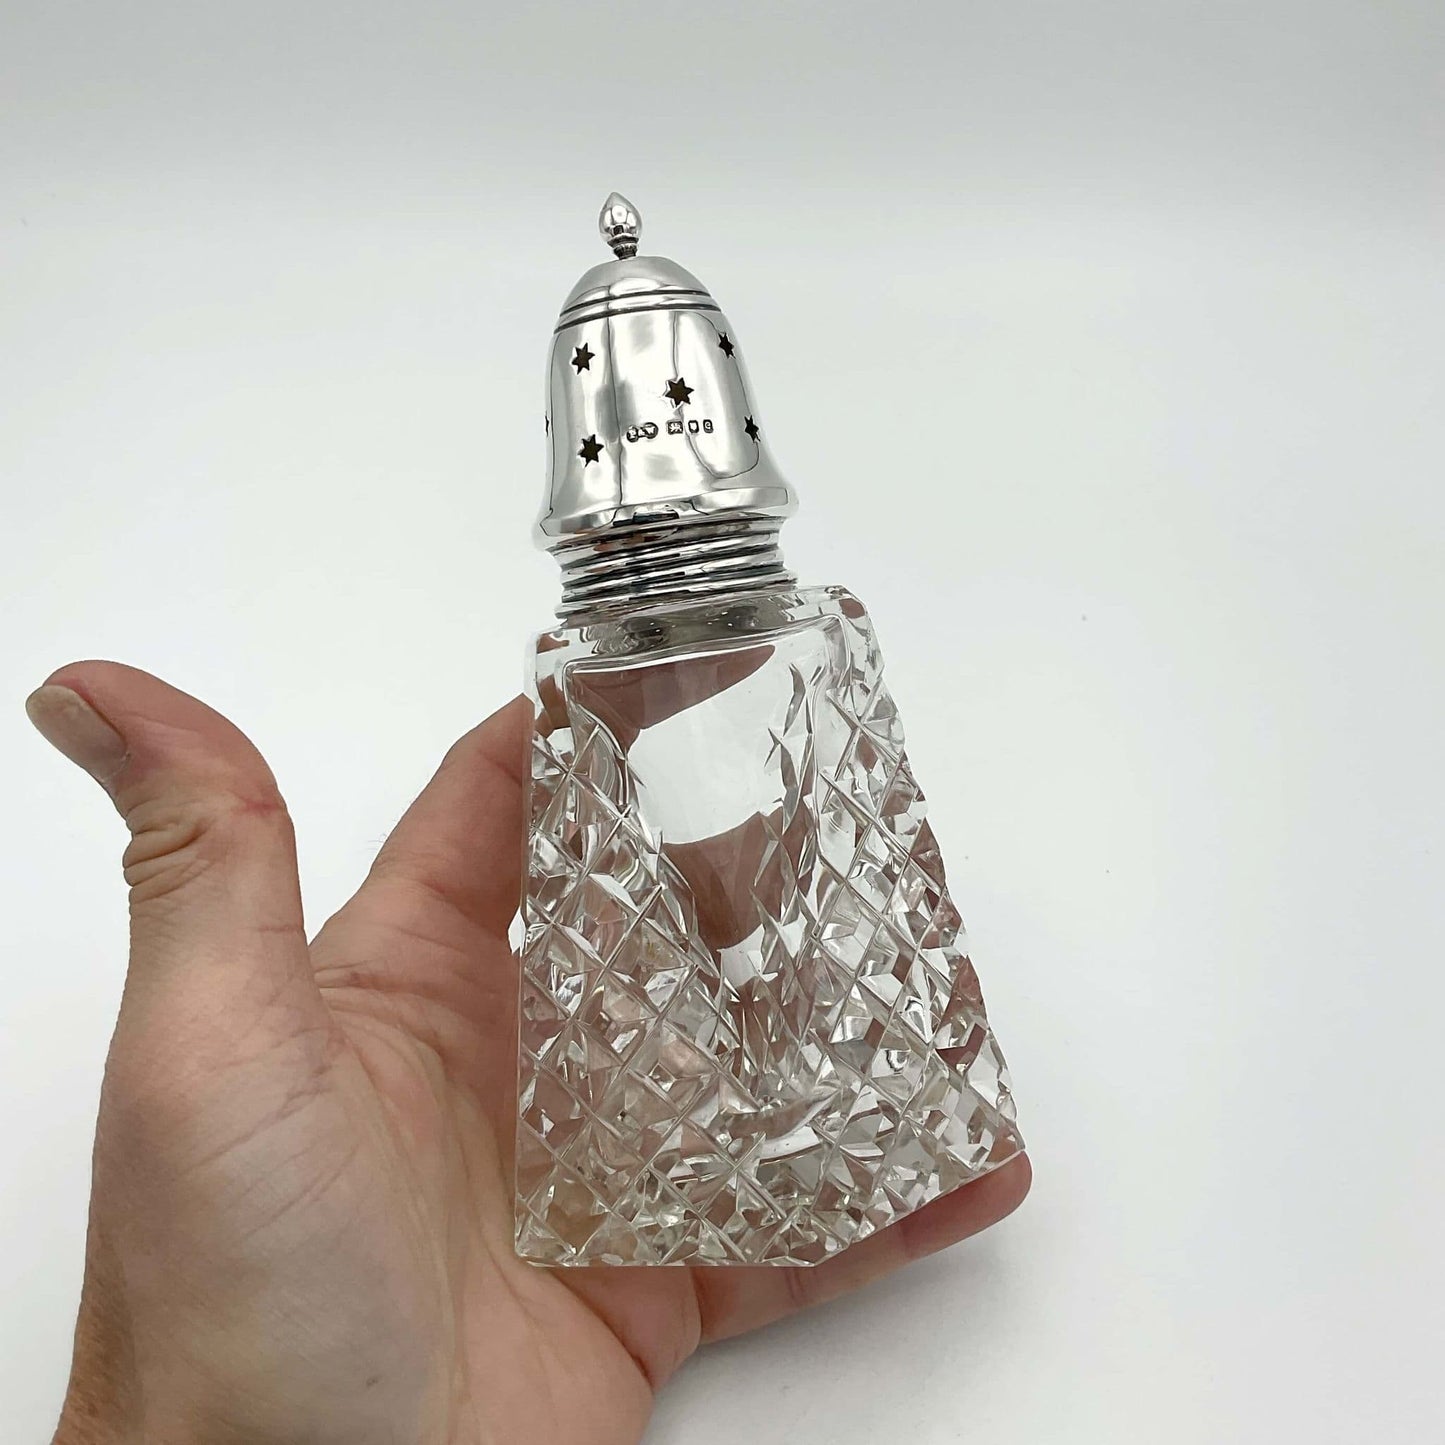 Vintage silver topped glass sugar shaker held in a hand